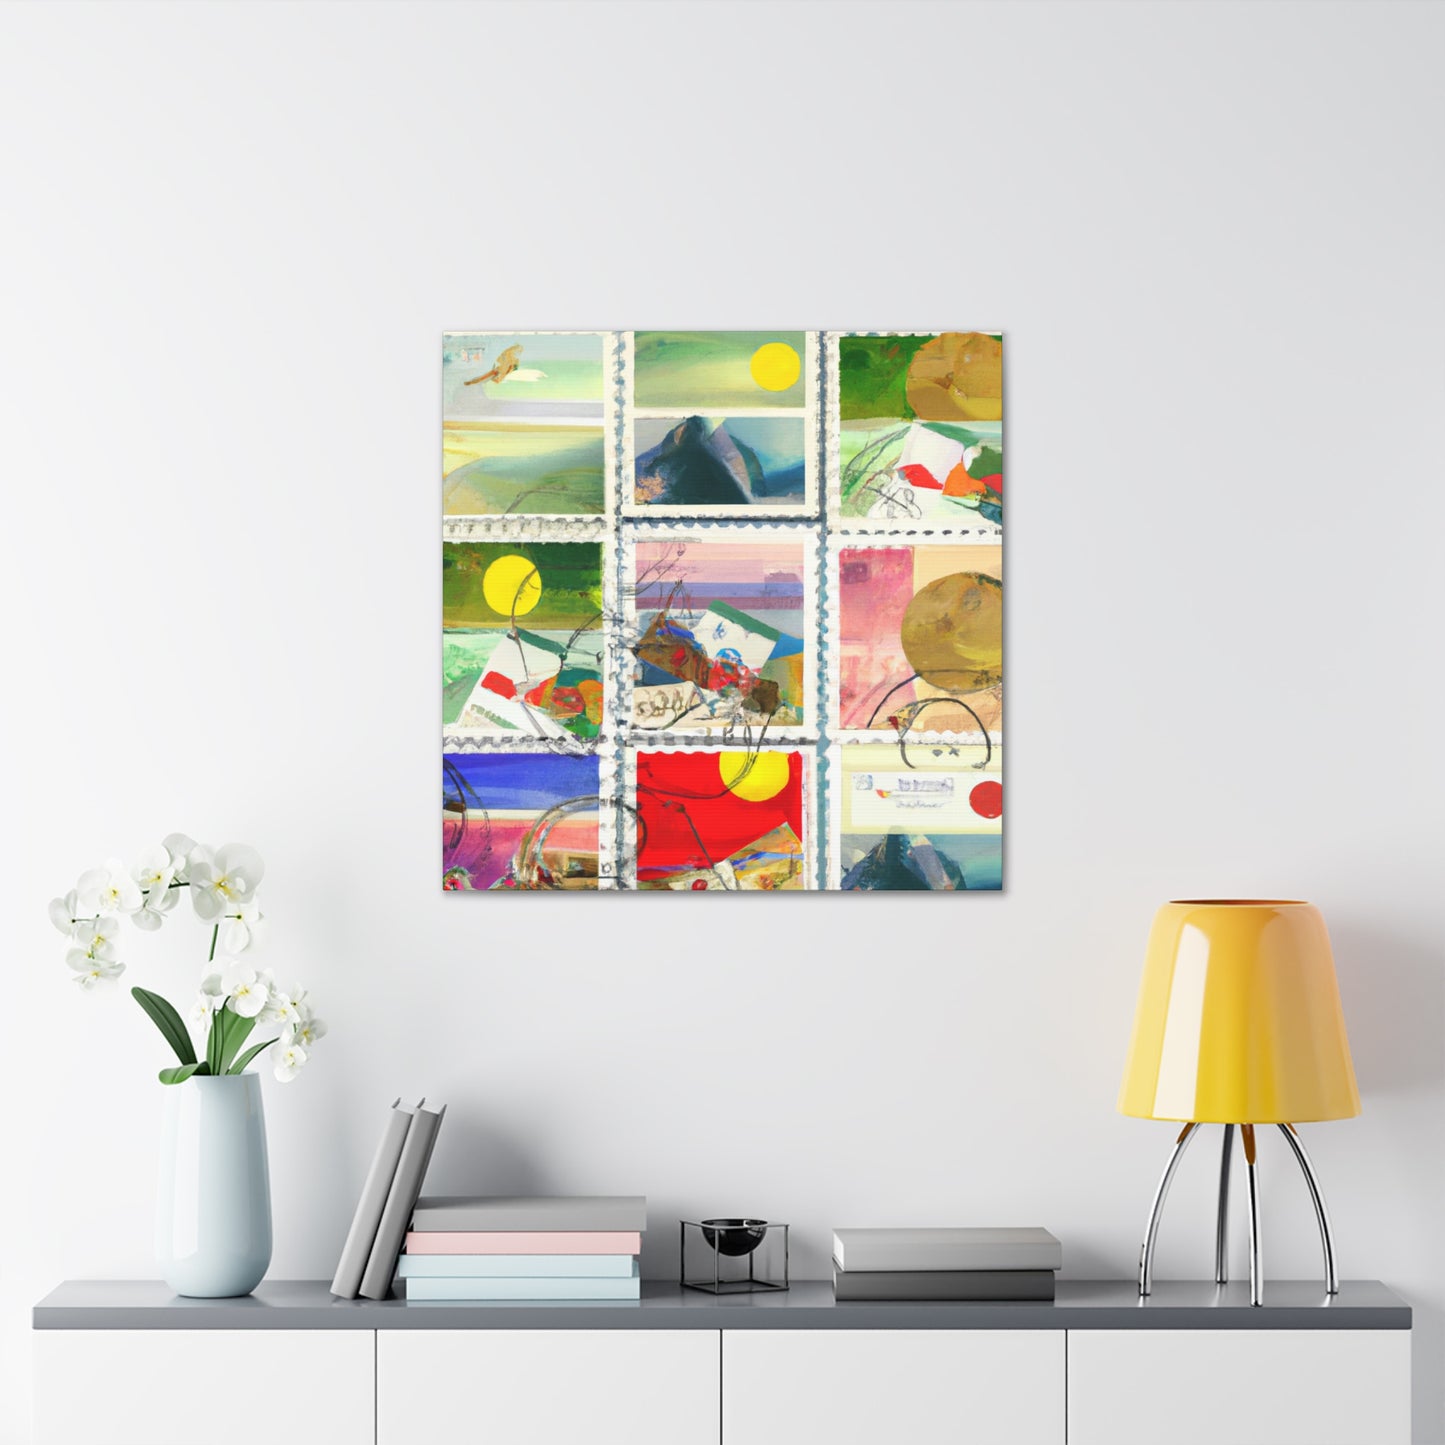 "Cultural Wonders of the World" stamps - Postage Stamp Collector Canvas Wall Art